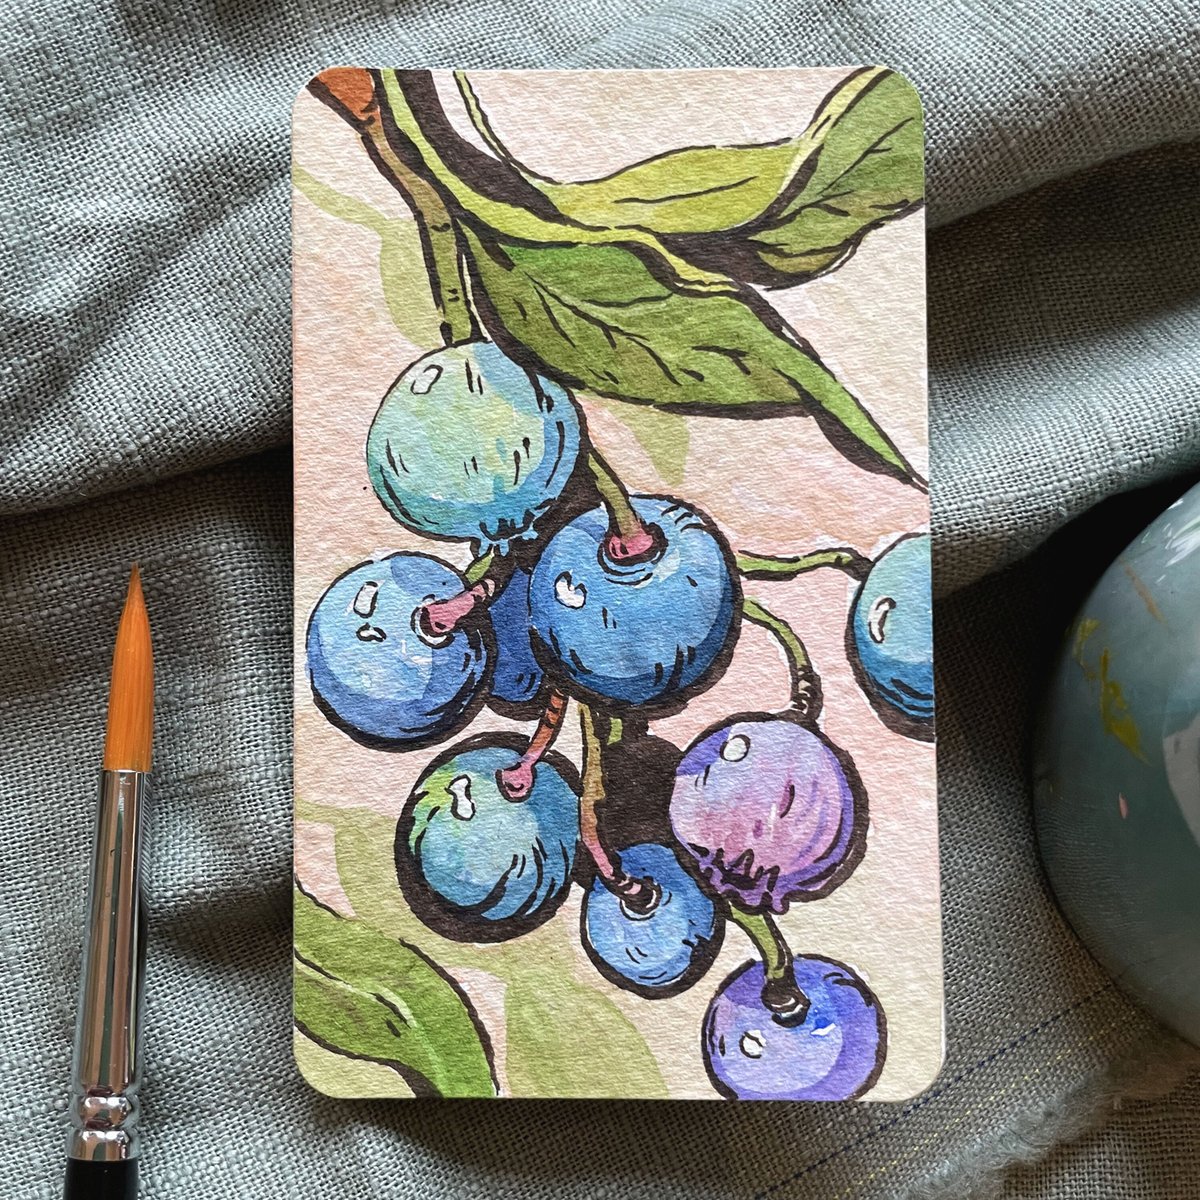 Blueberries 🌿 painted with water color and ink! All originals and more 20%off this week on my website :) ✨
#aquarell #watercolor #inkart #art #natureart #illustration #artforsale #painting #nature #blueberries #inkdrawing